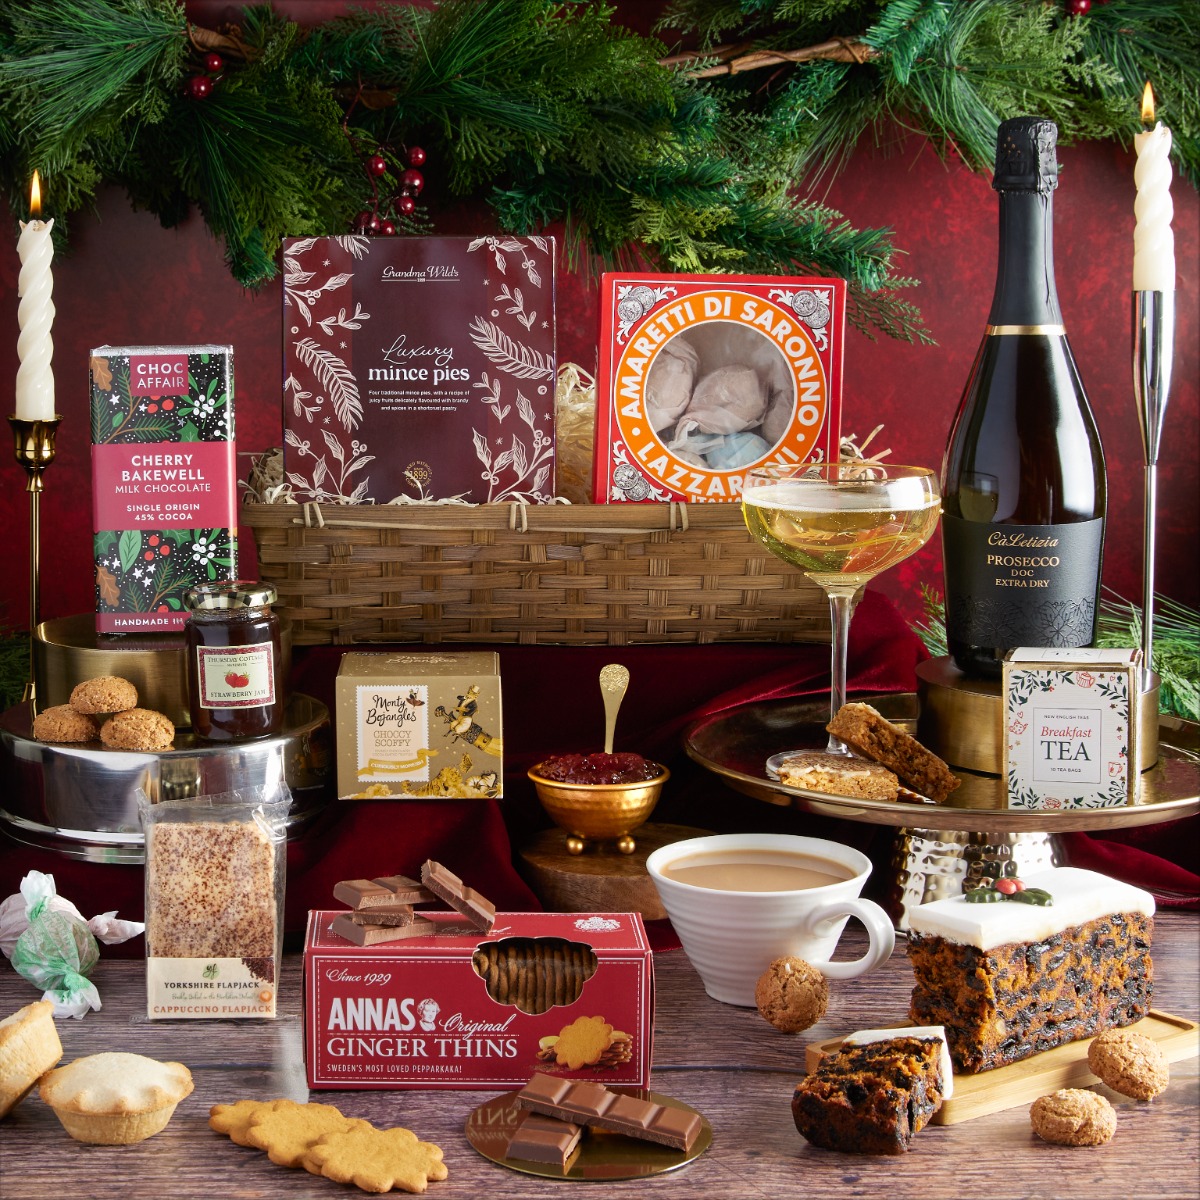 Festive Afternoon Tea Hamper with contents on display